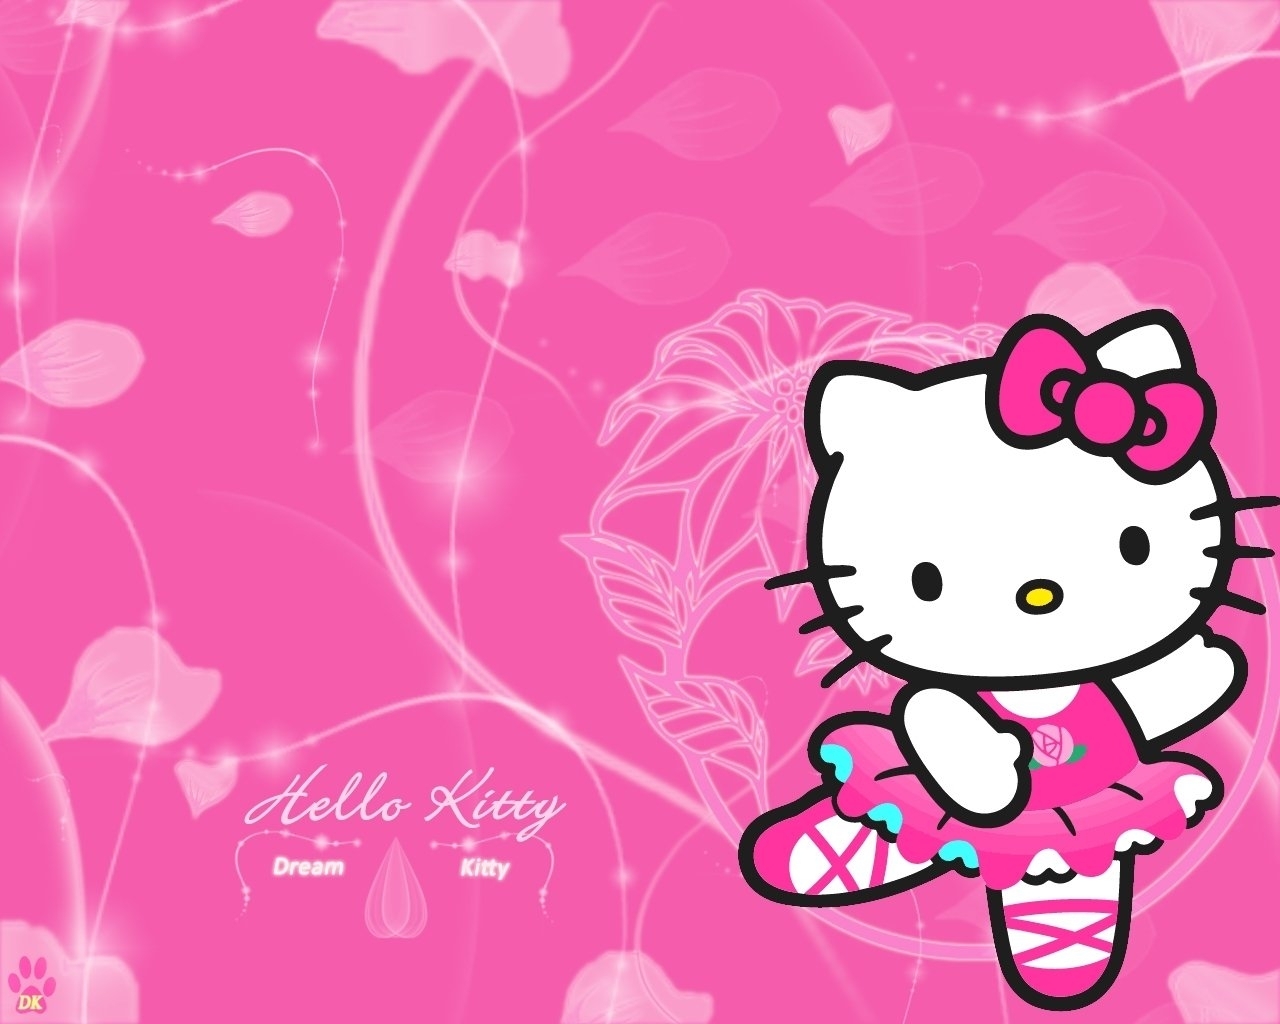 10 Latest Hello Kitty Hd Wallpaper FULL HD 1920×1080 For PC Background